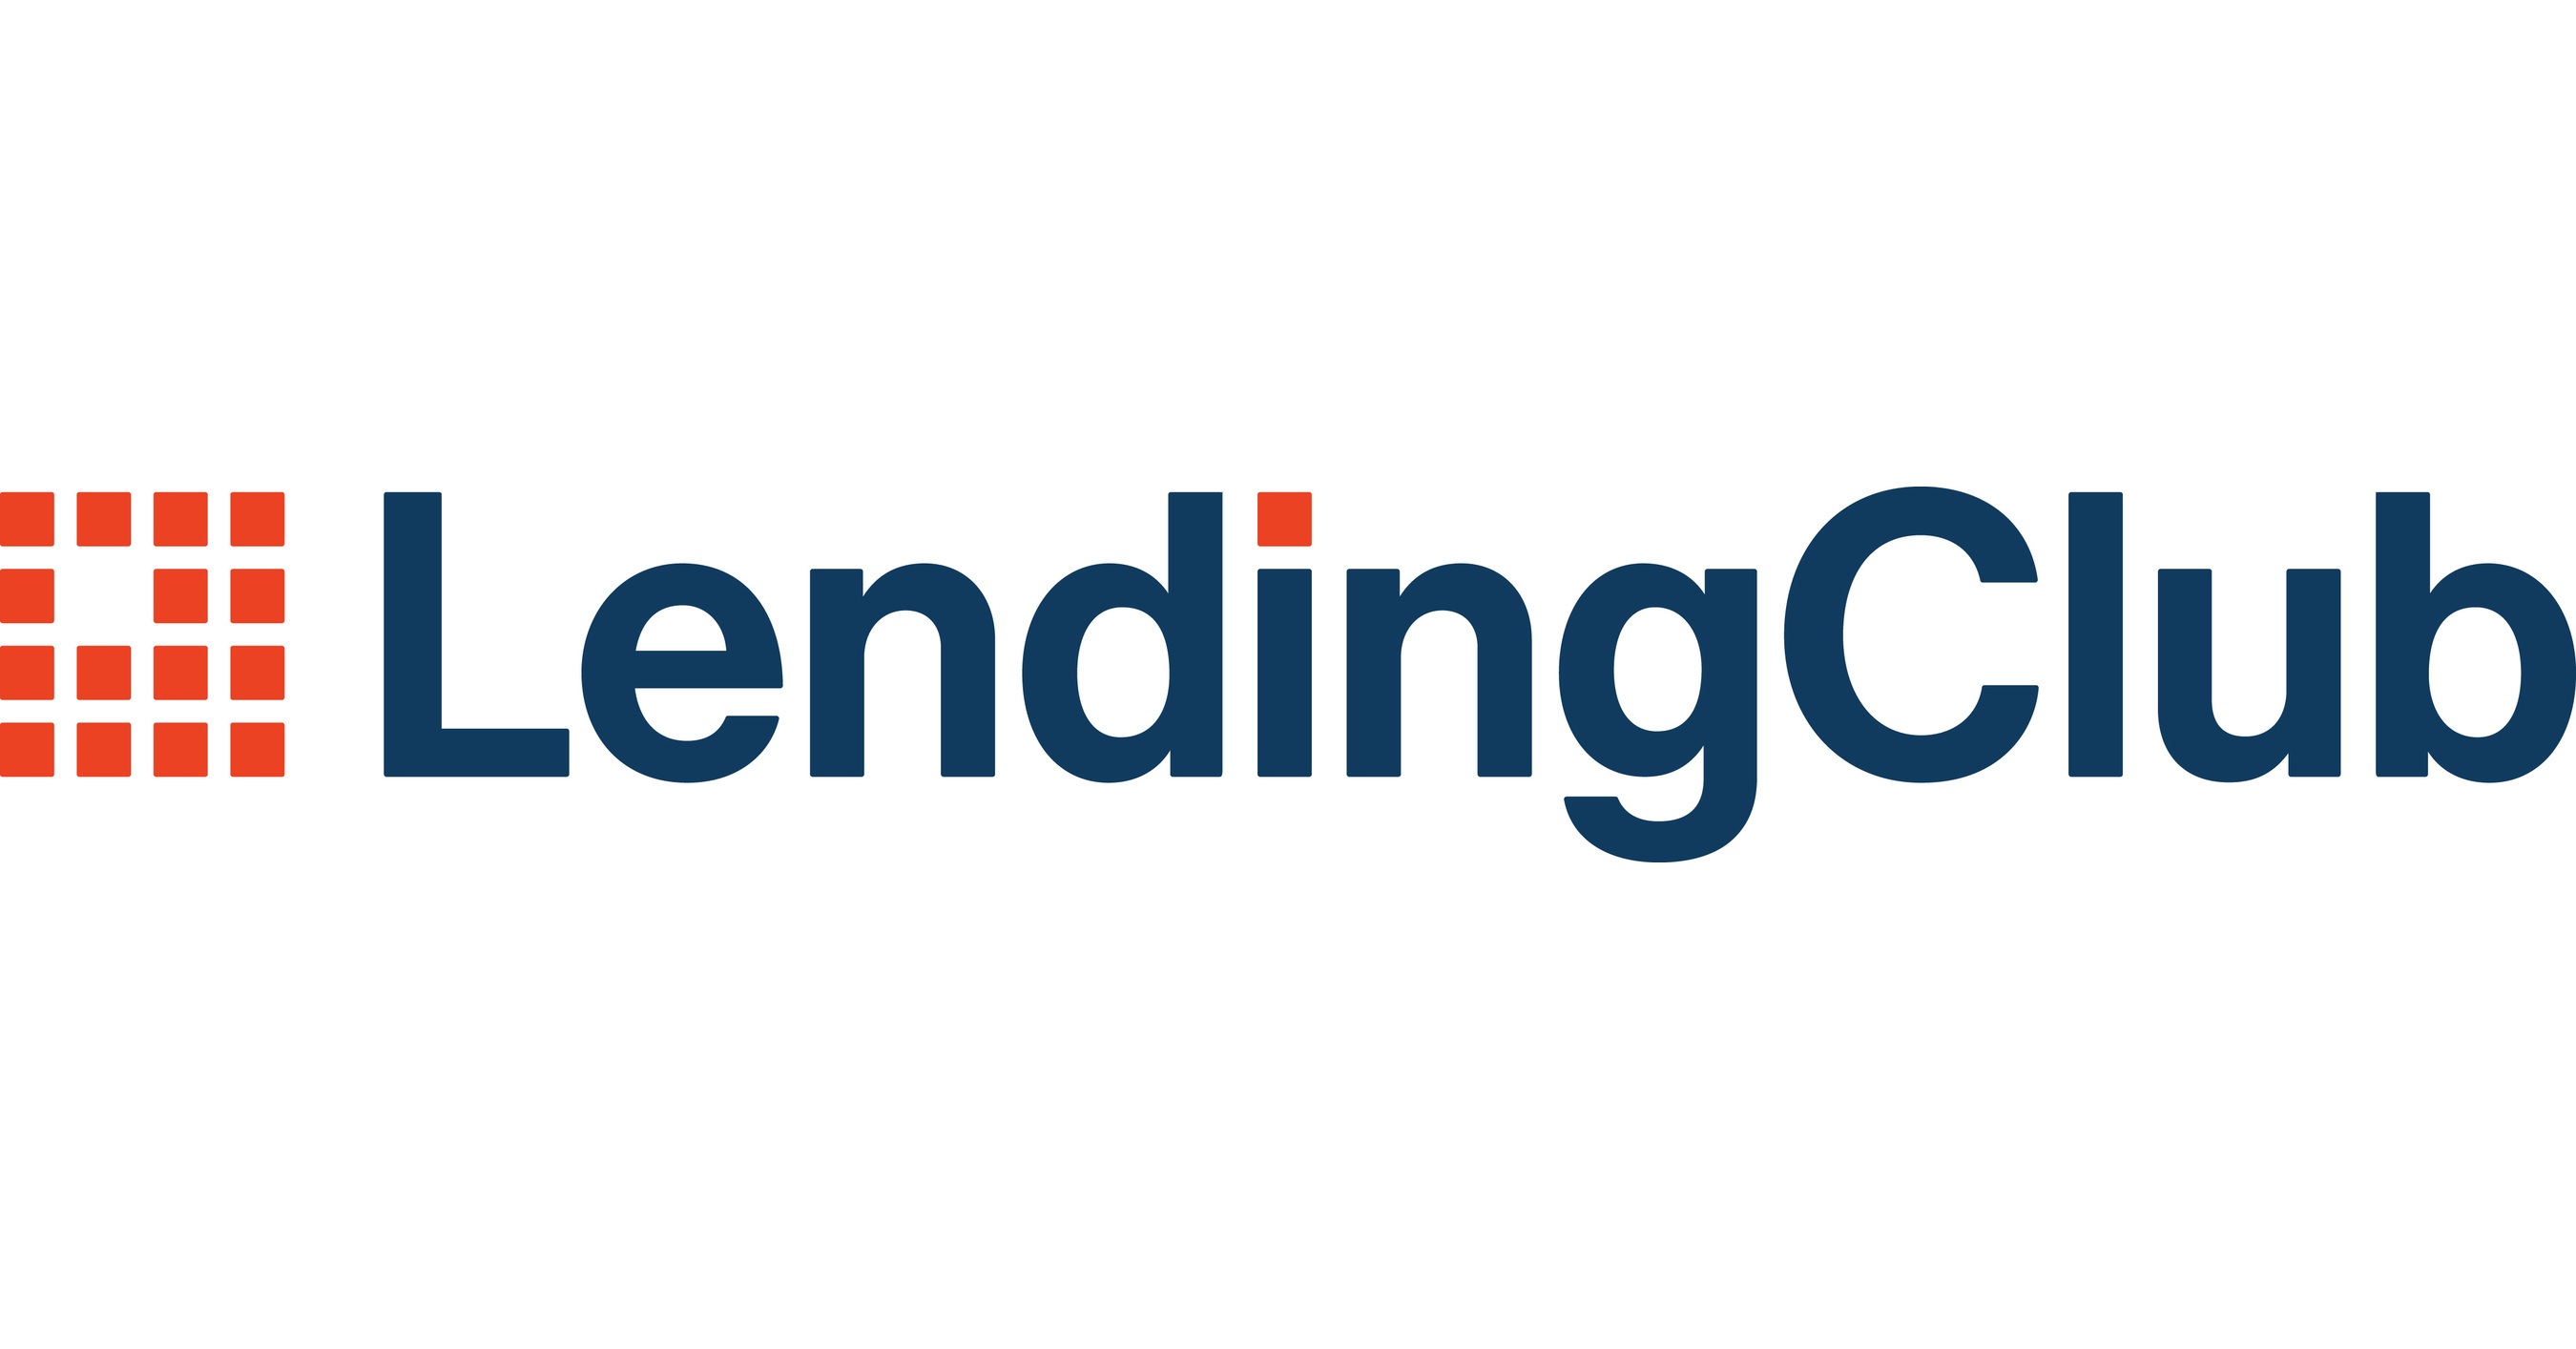 LendingClub will participate in the Barclays Emerging Payments & Fintech Forum 2023 on 17 May